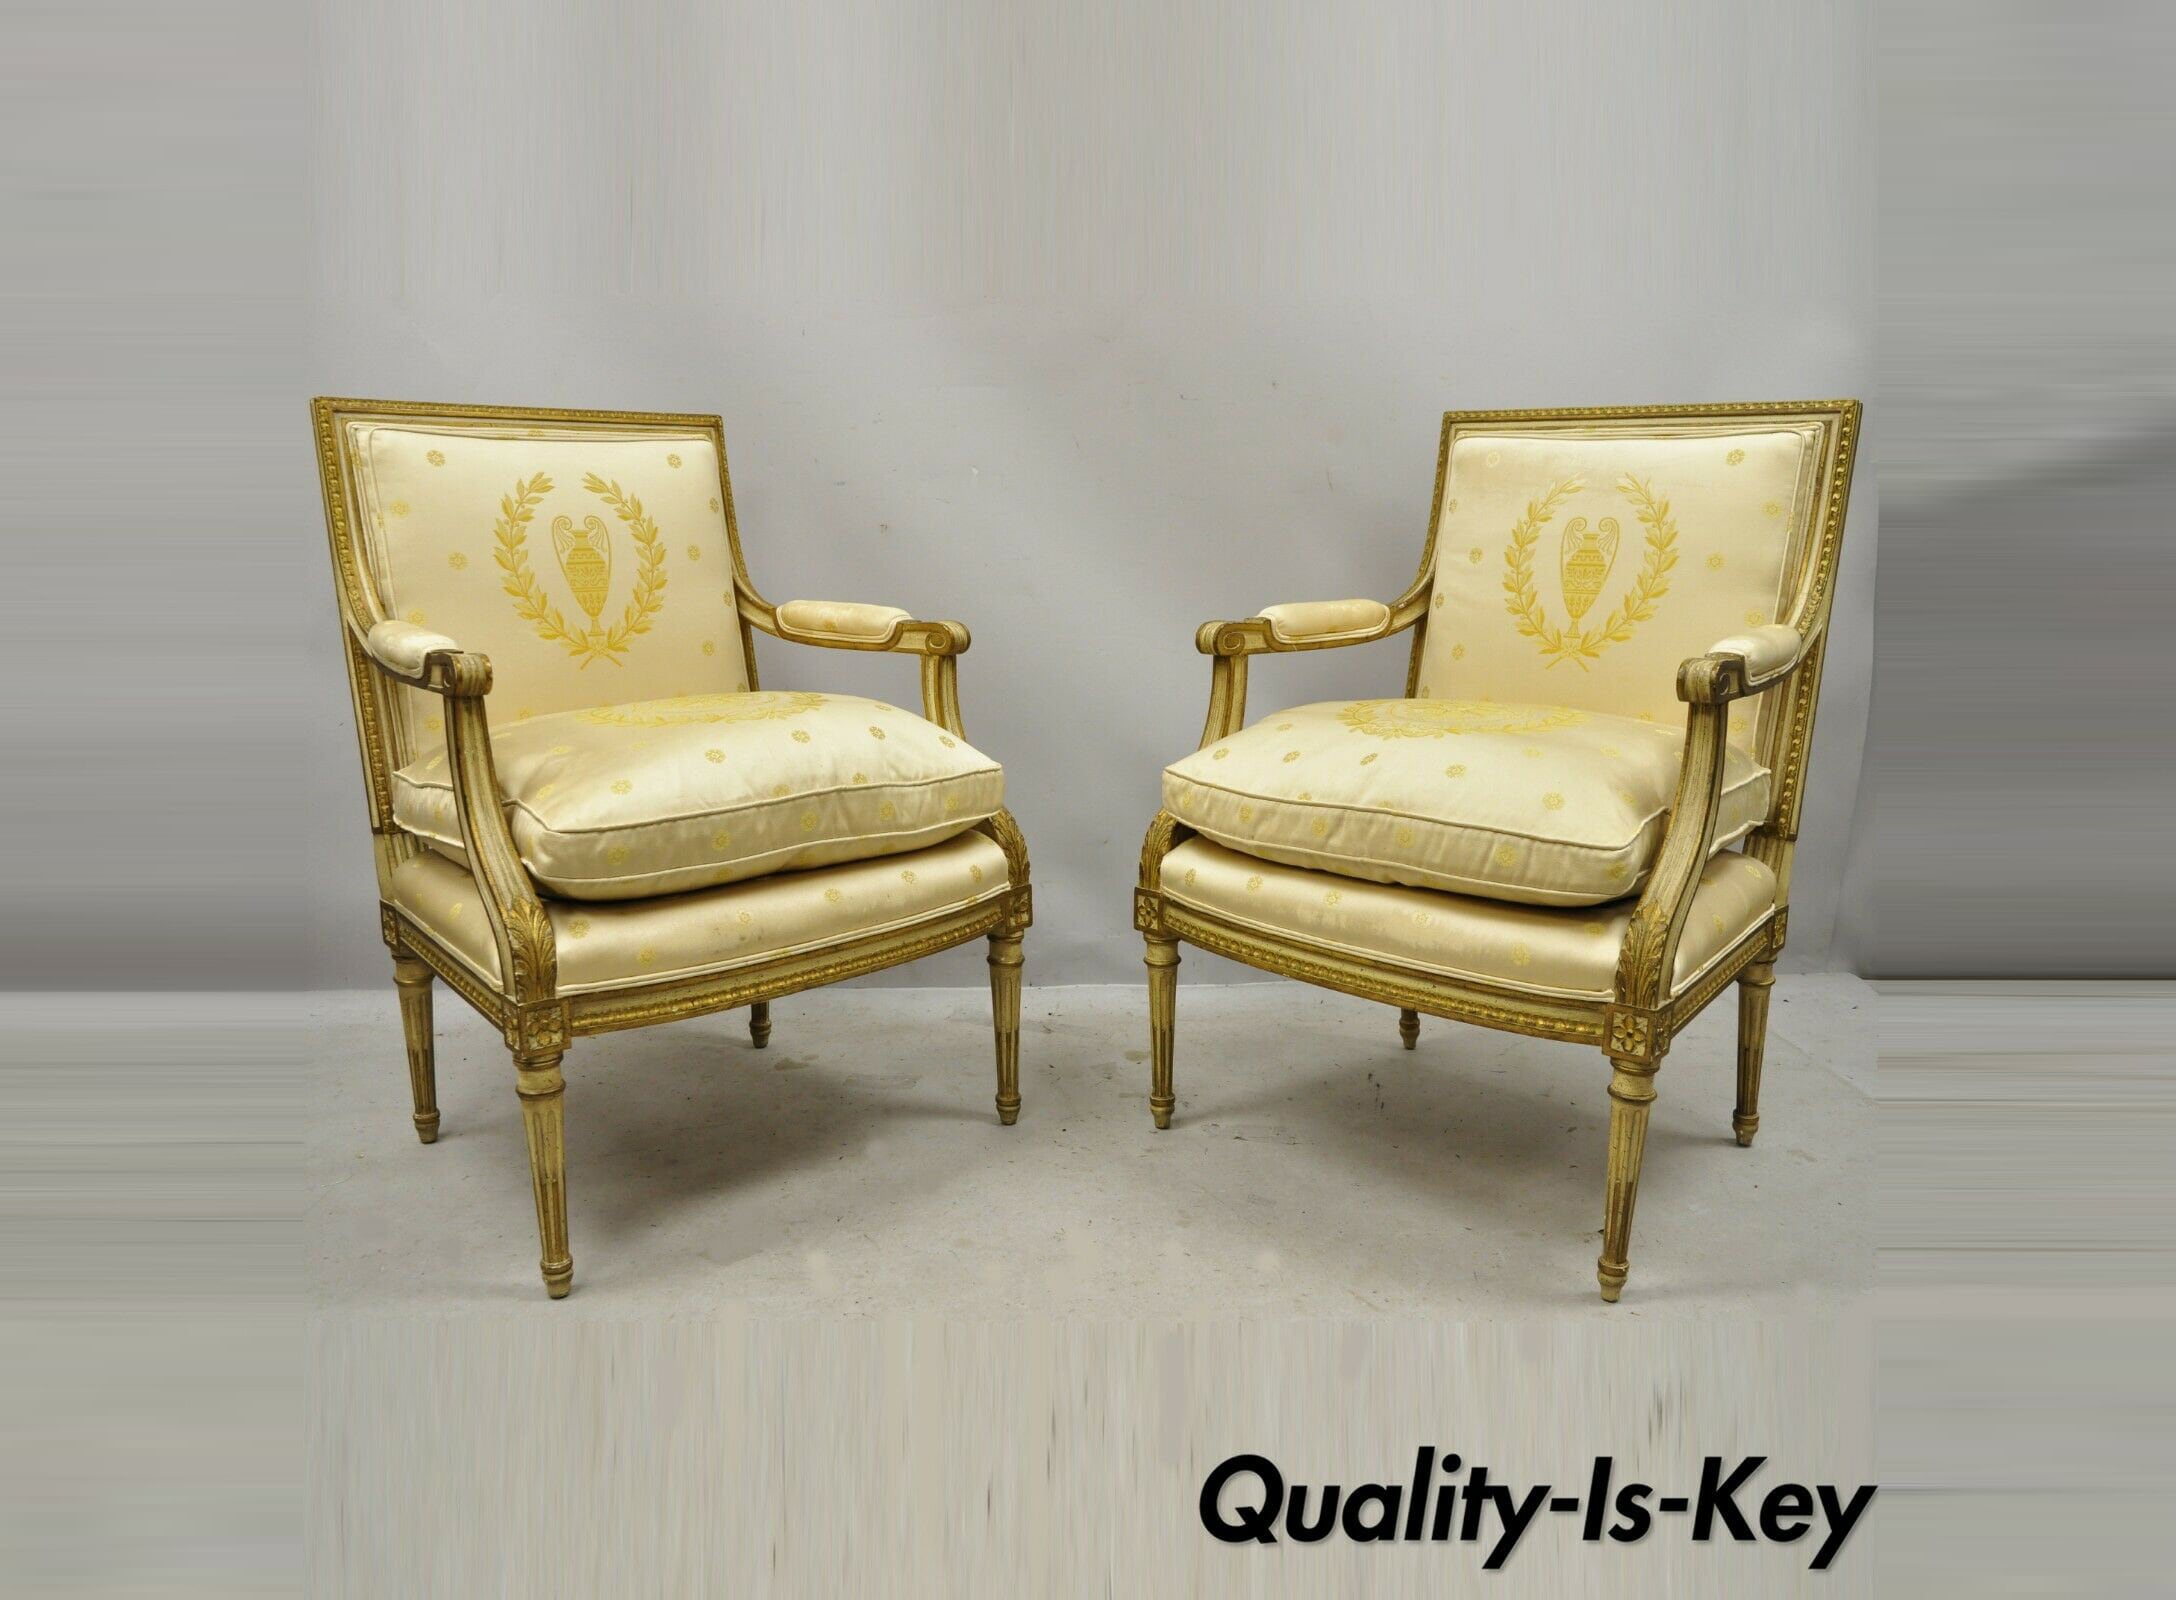 Vintage Louis XVI Style Fortuny Upholstered Armchair, U.S.A./Italy